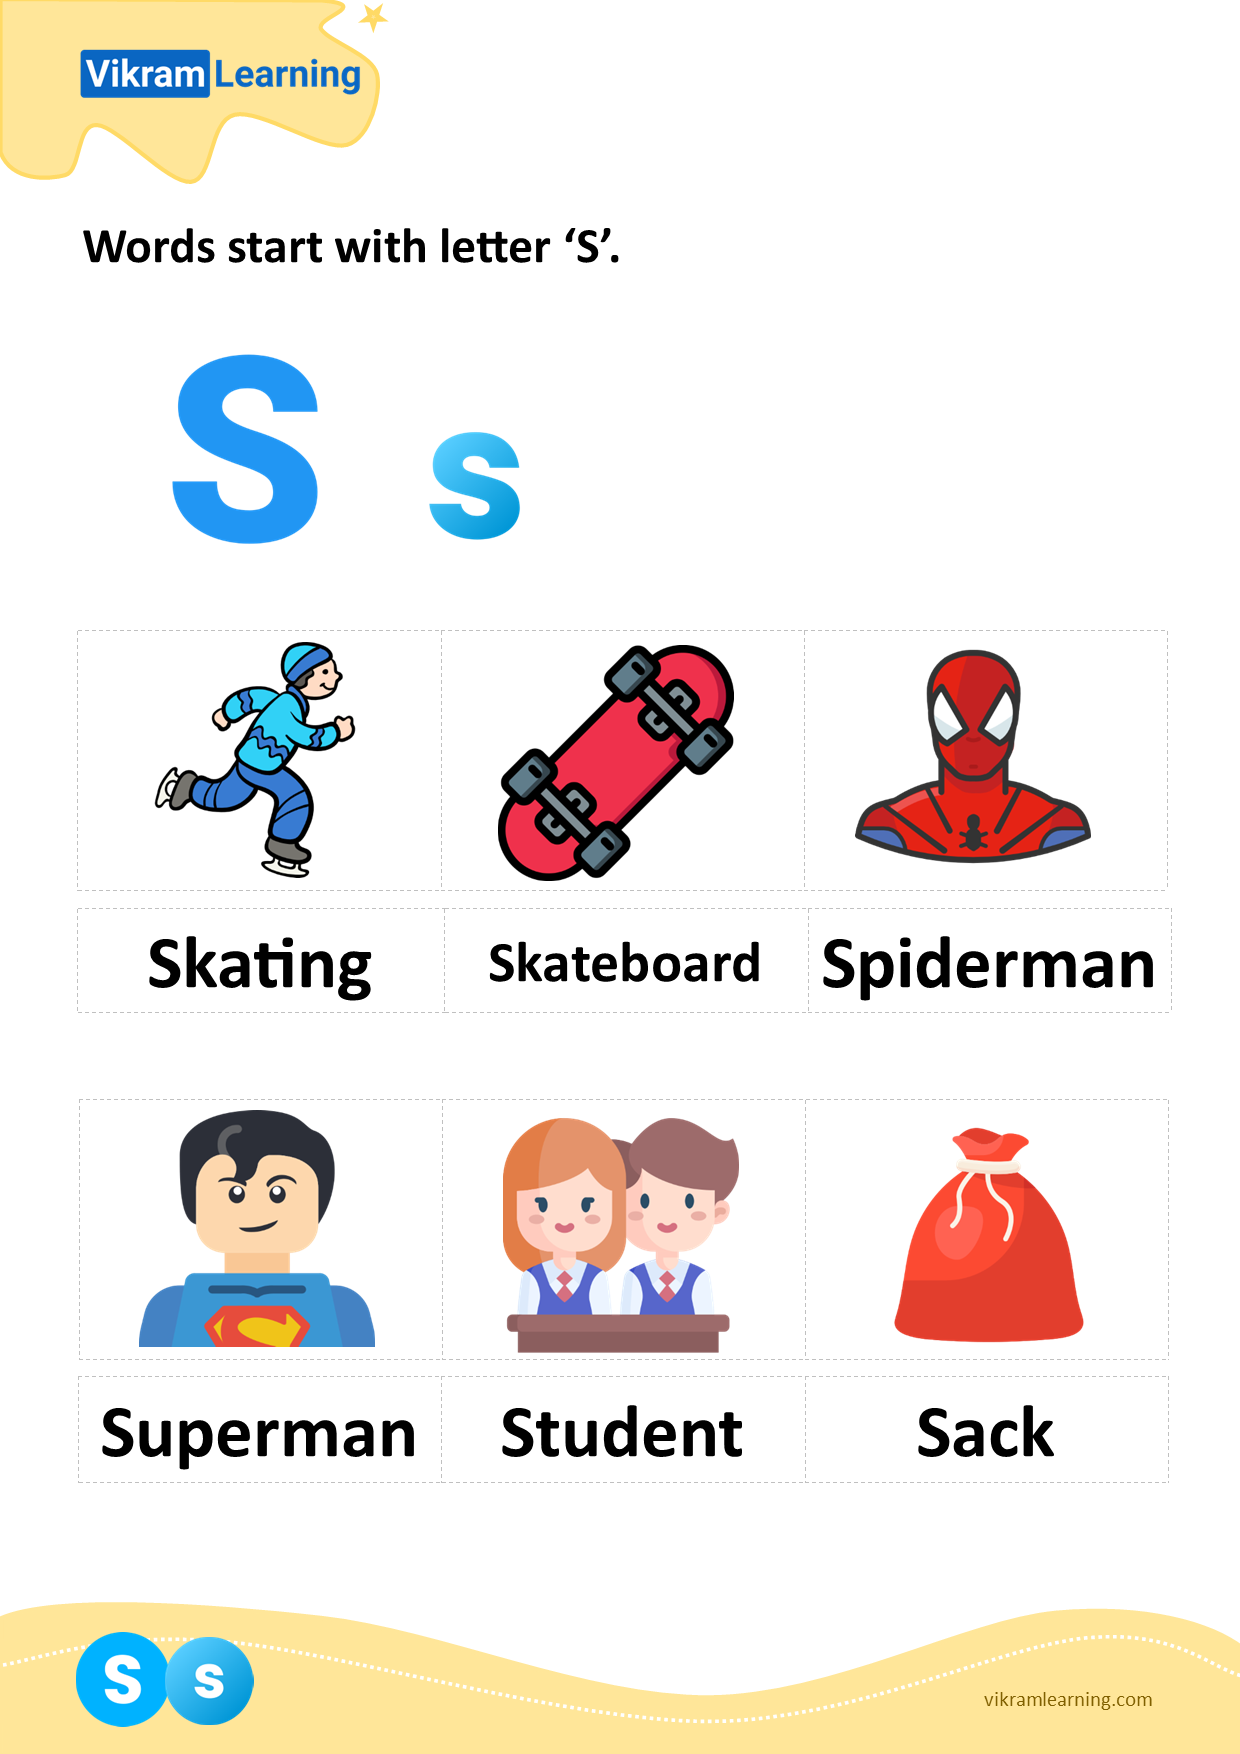 Download words start with letter 's' worksheets